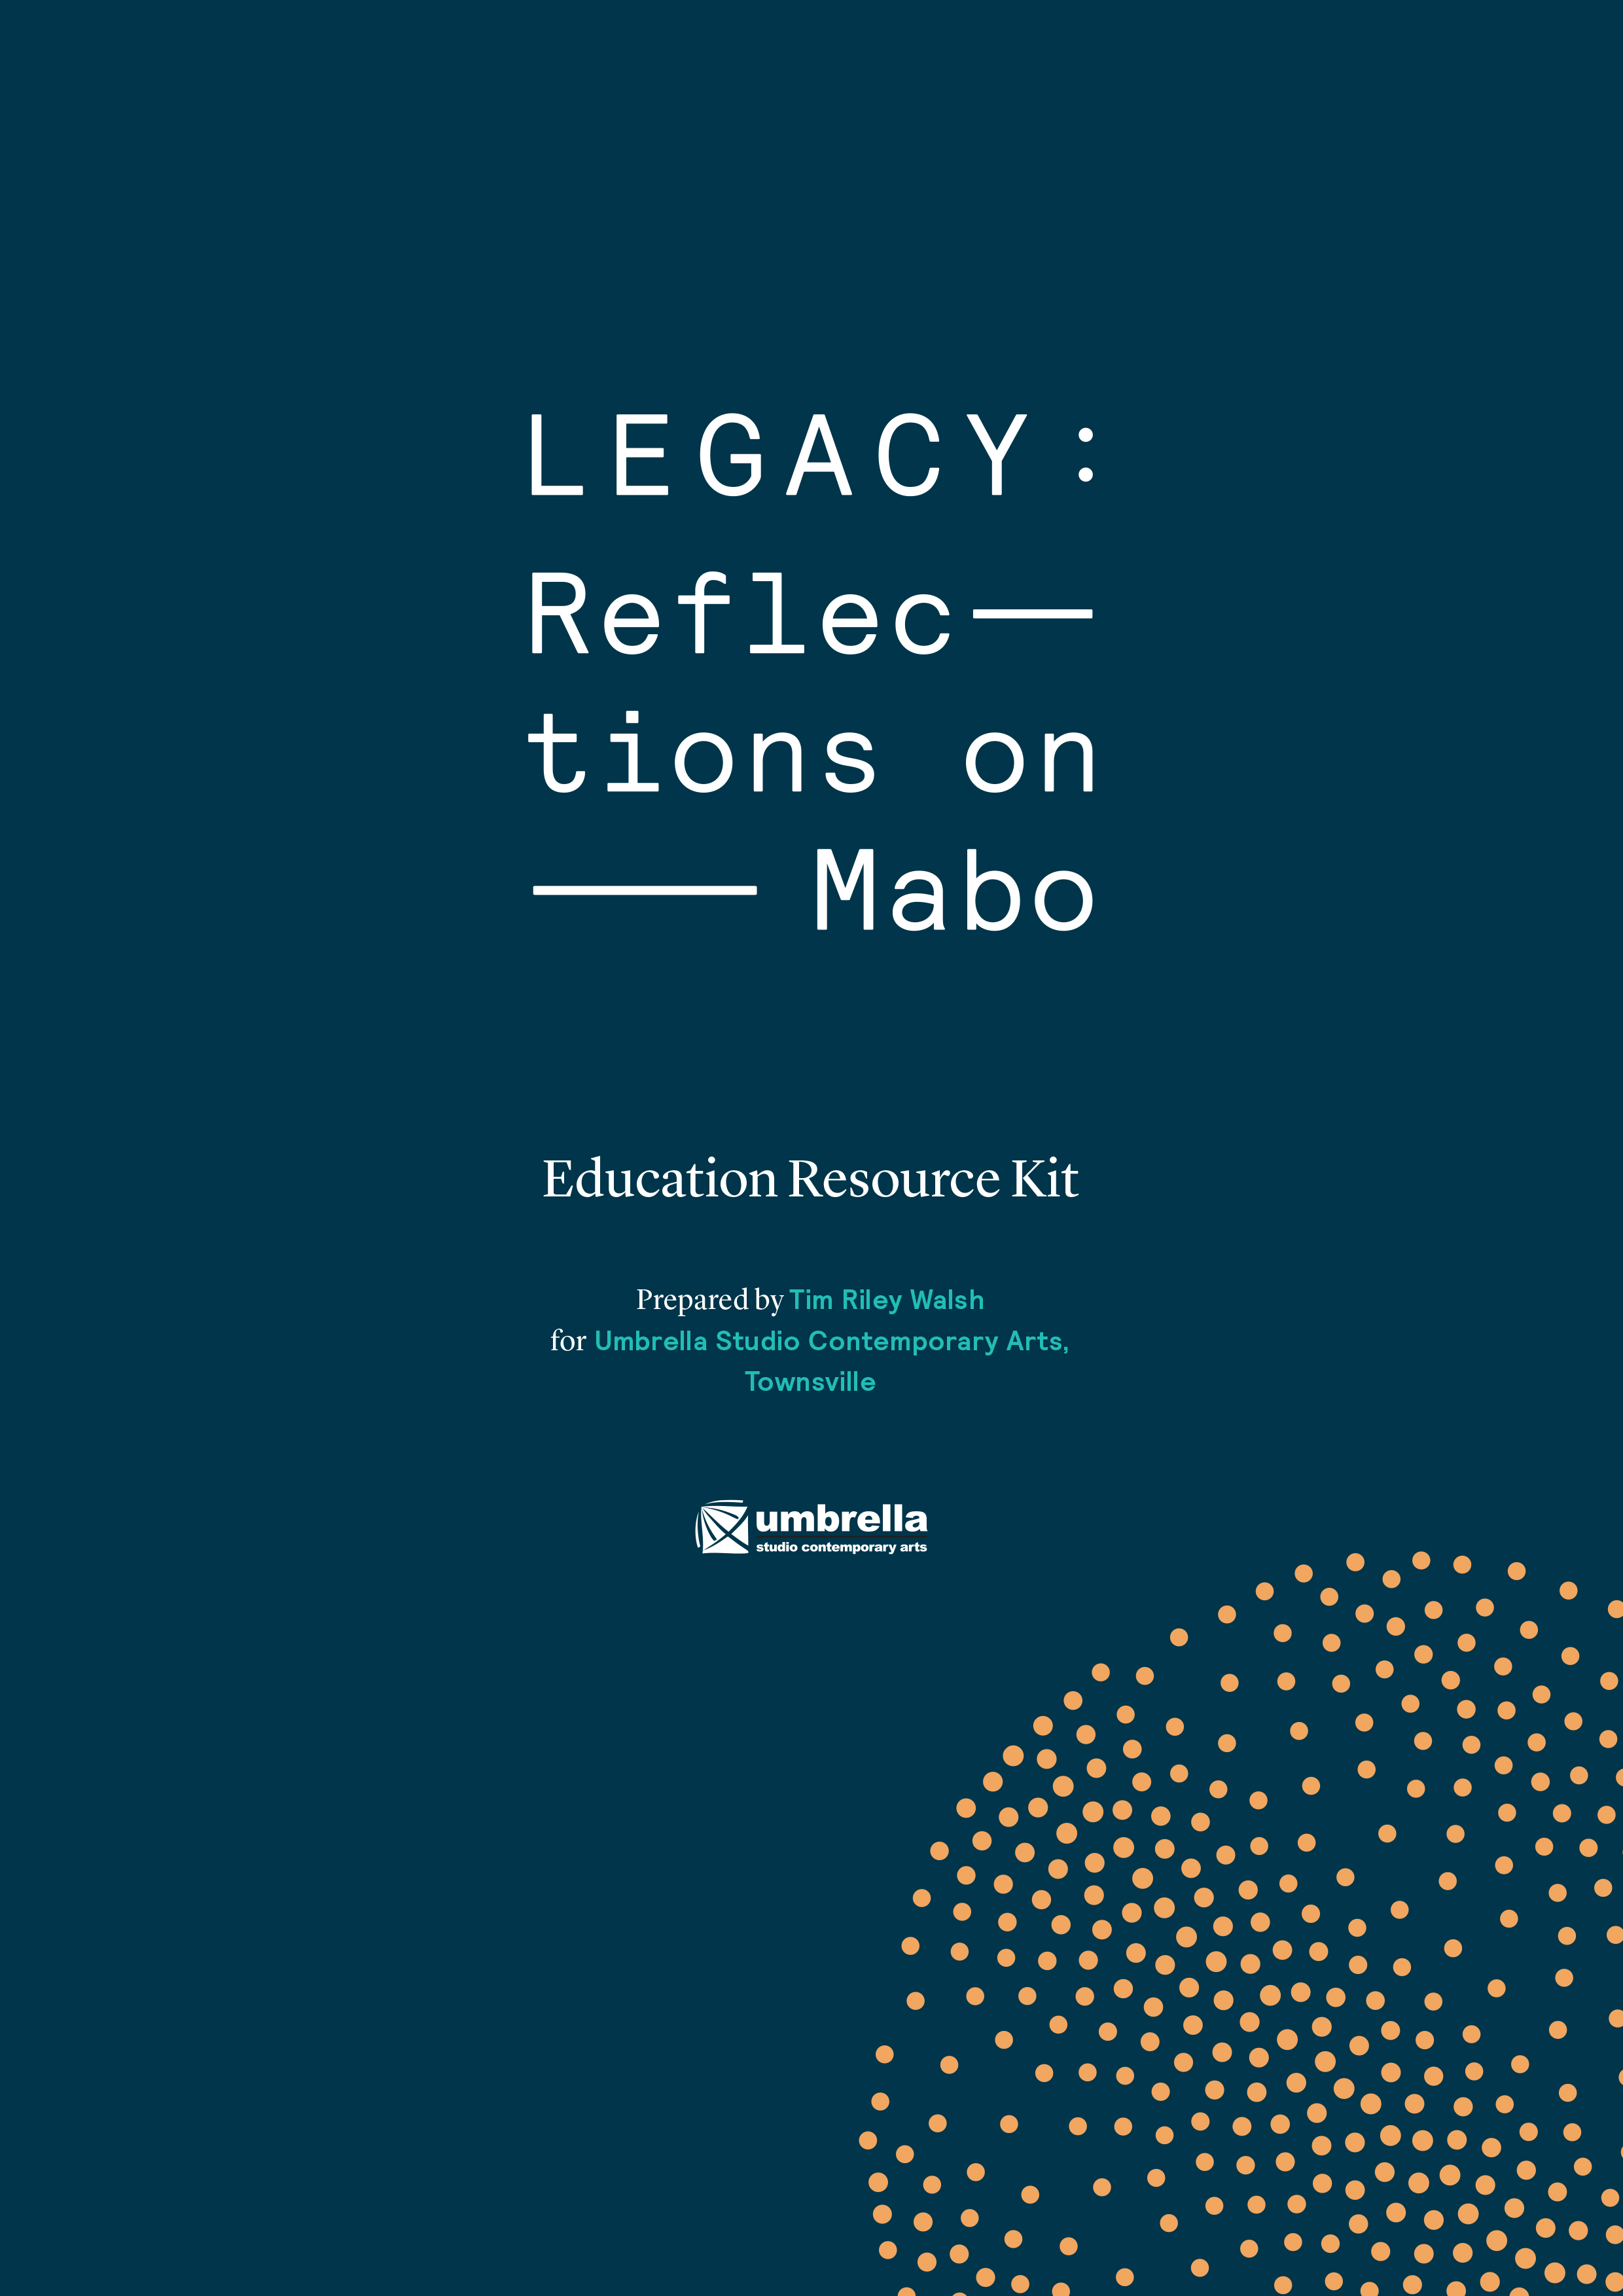 Legacy-Reflections-on-Mabo_Education-Kit_1 - Page 1.jpg